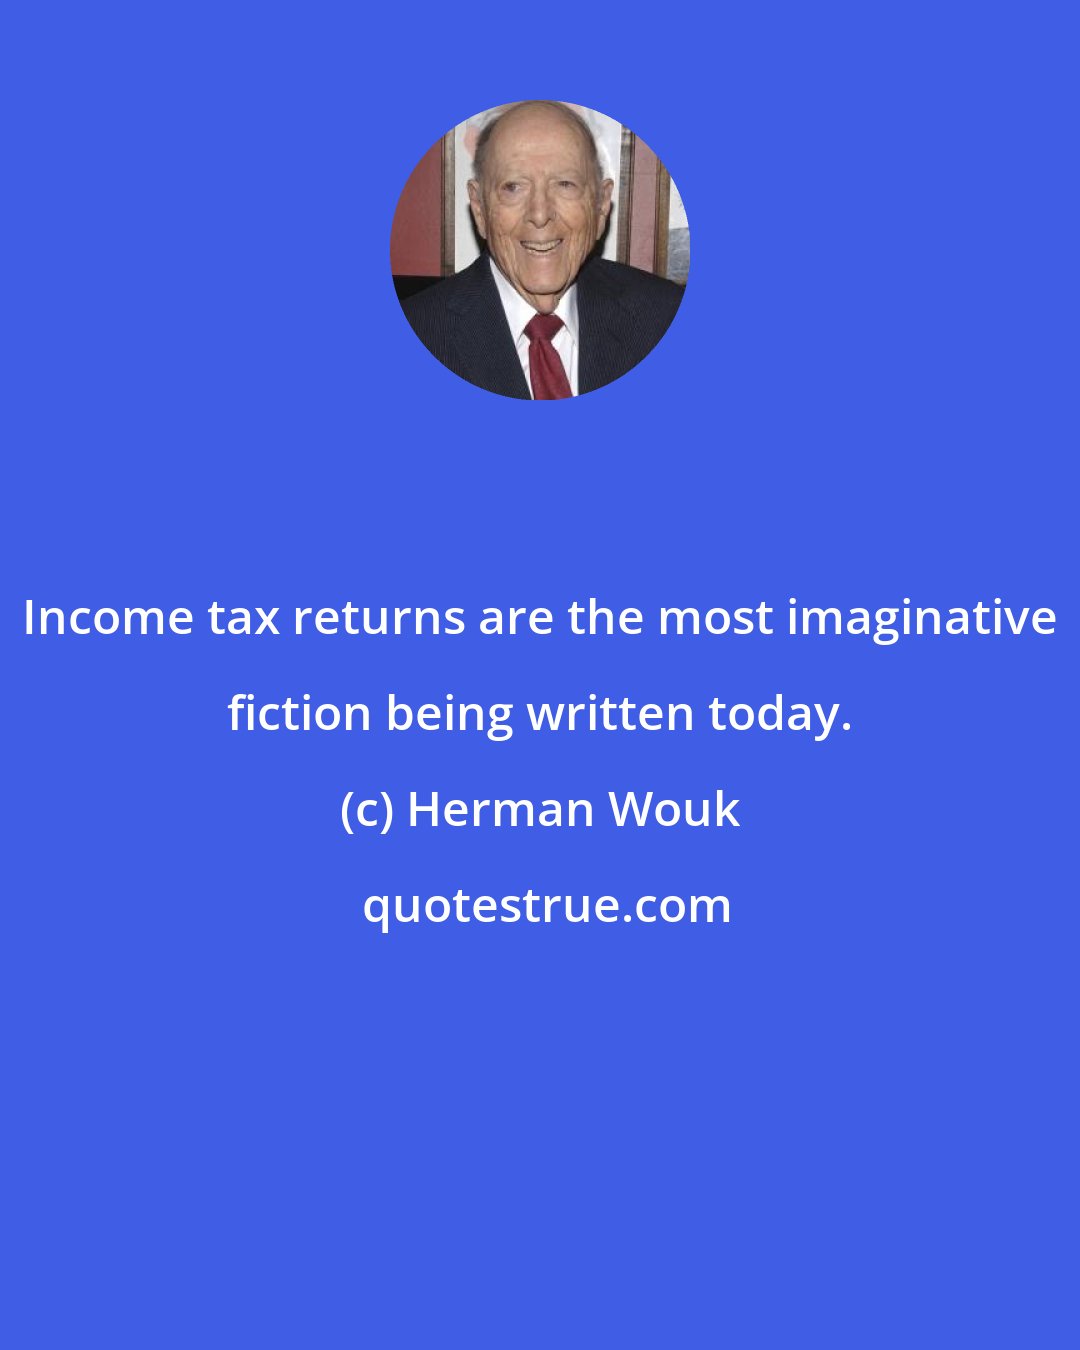 Herman Wouk: Income tax returns are the most imaginative fiction being written today.